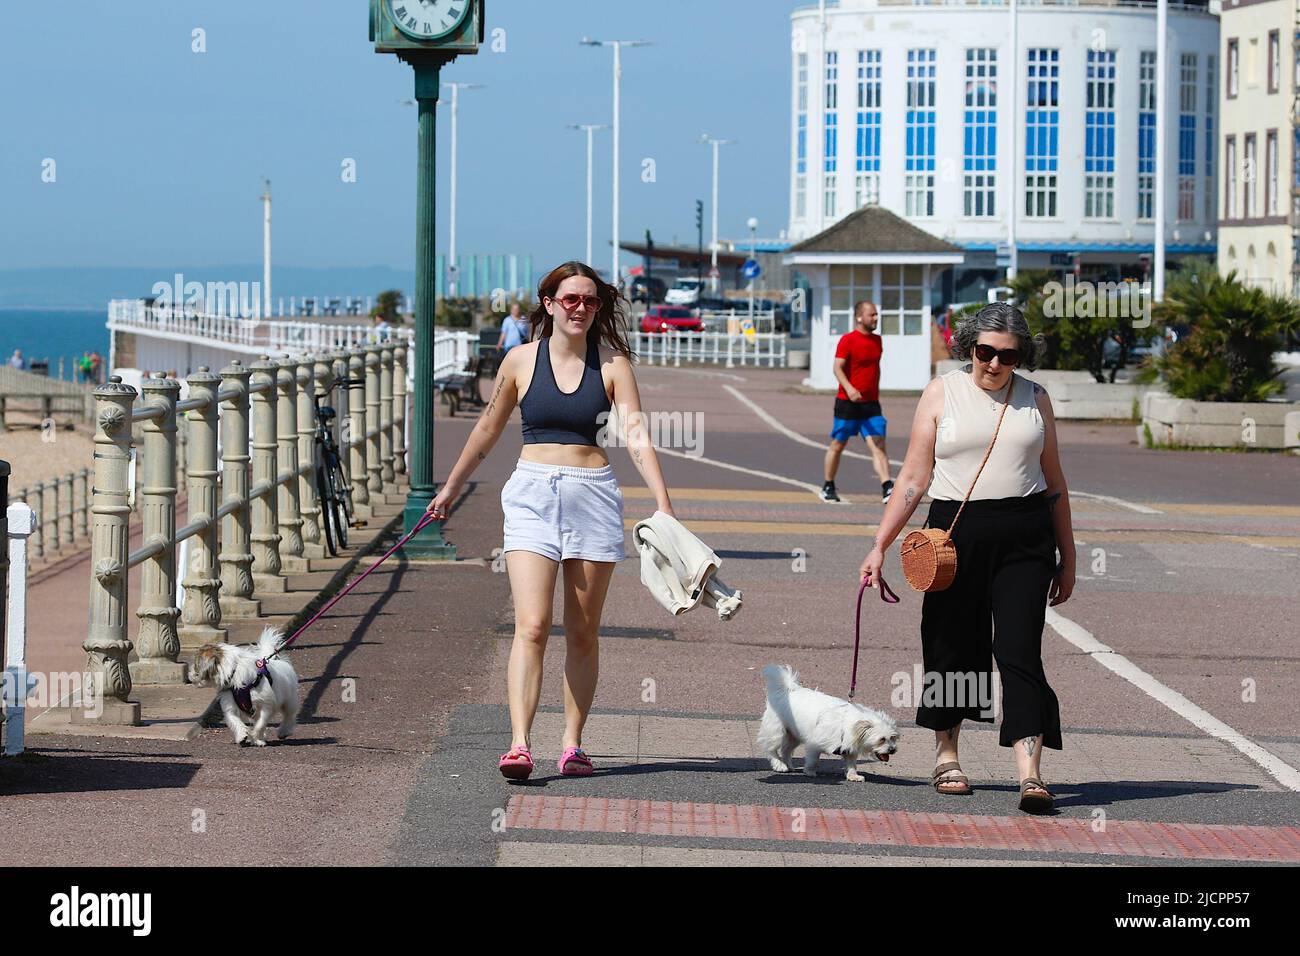 Hastings, East Sussex, UK. 15 Jun, 2022. UK Weather: Hot and sunny at the seaside town of Hastings in East Sussex as Brits enjoy the warm weather today along the seafront promenade. Two woman enjoying the sunshine while walking their dogs. Photo Credit: Paul Lawrenson /Alamy Live News Stock Photo